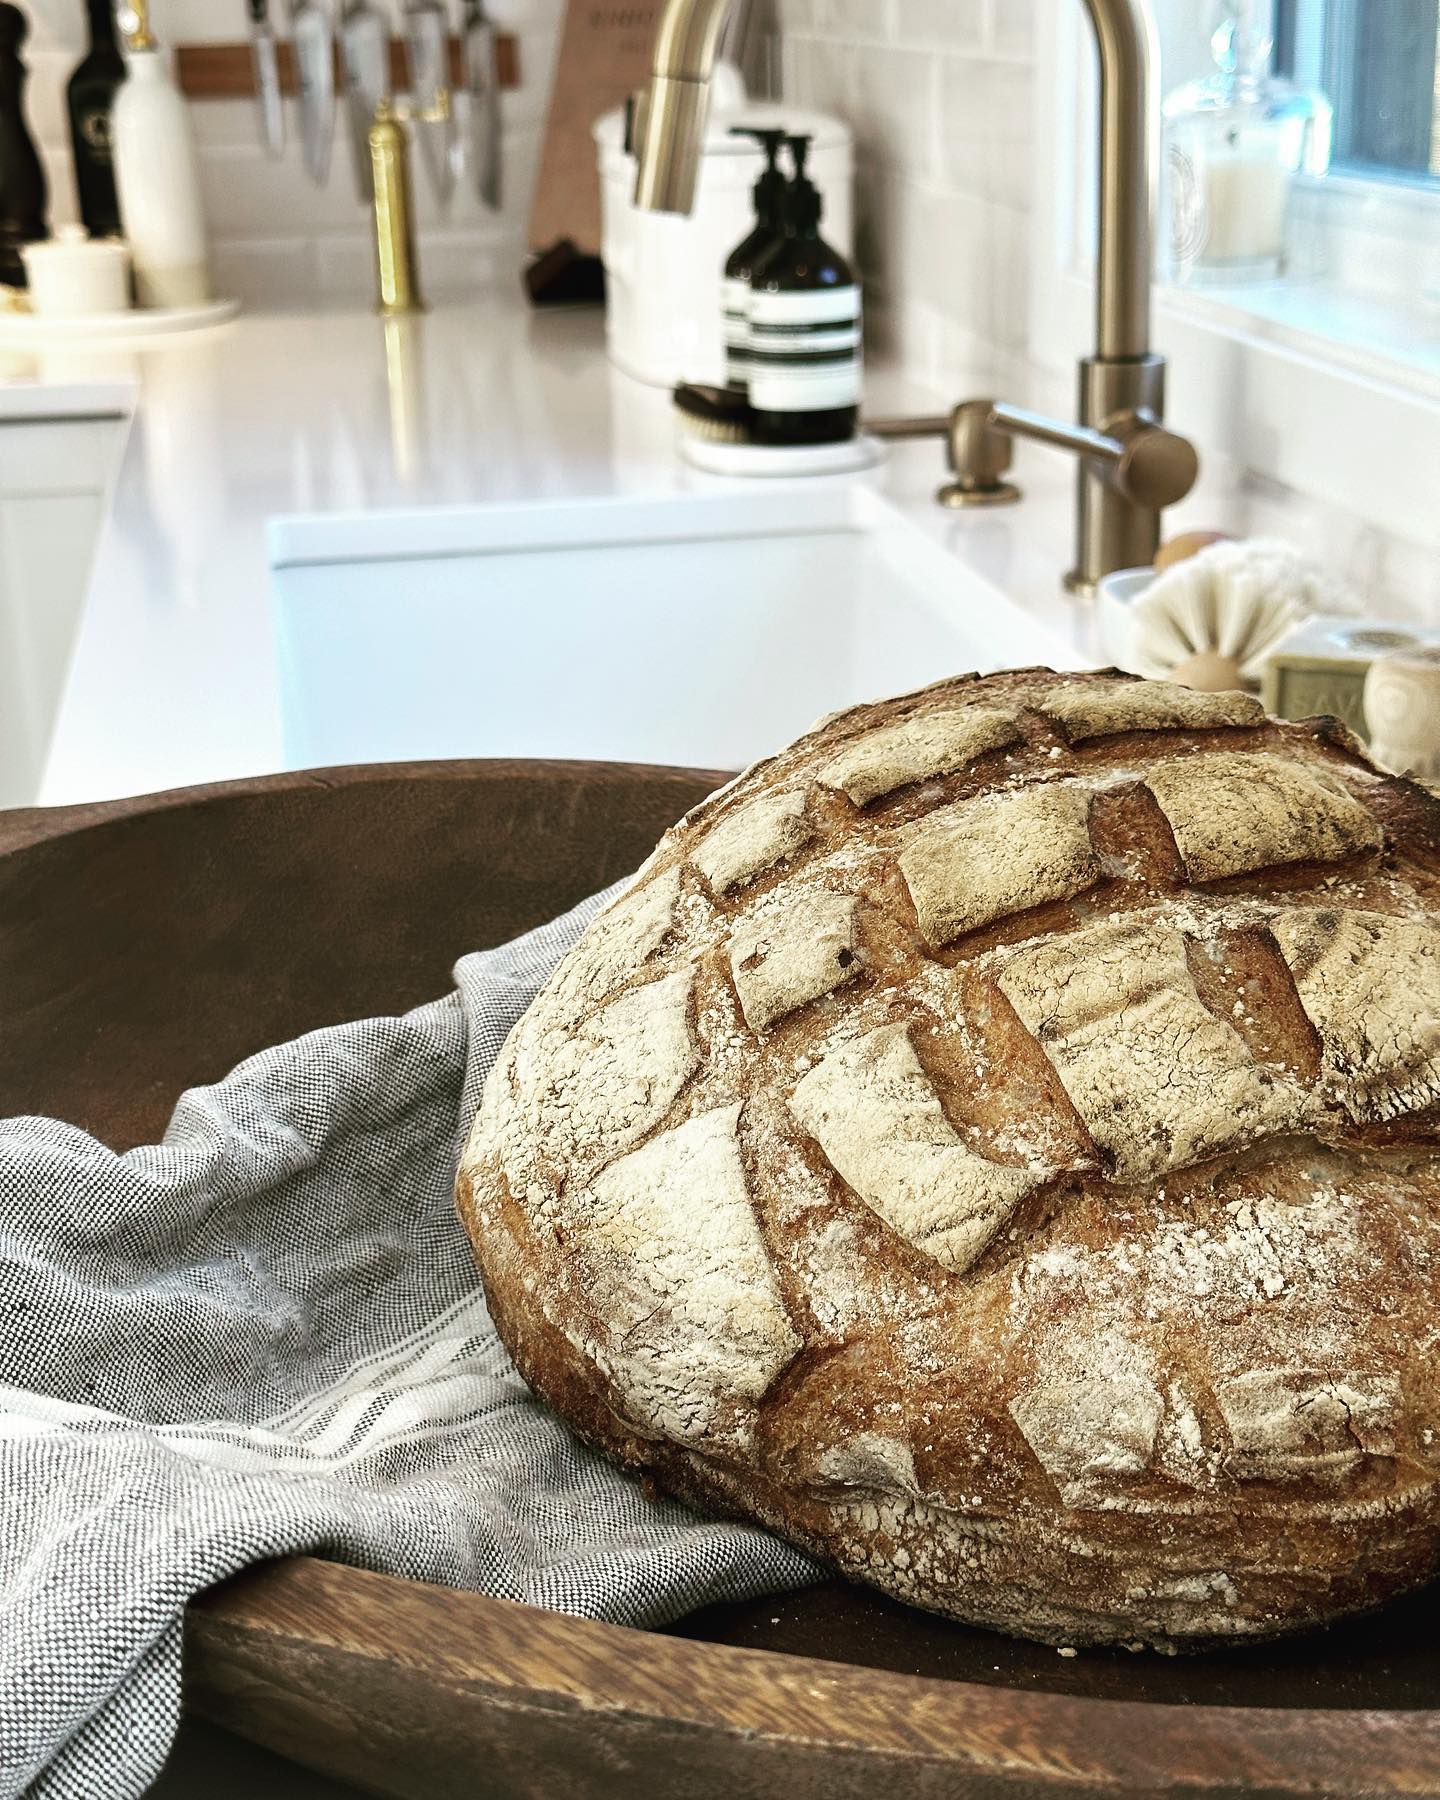 Slow weekend! ☕️🥐❤️ #bread #breadmaking #artisanbread #countrystylebread #countryliving #maisonoslo